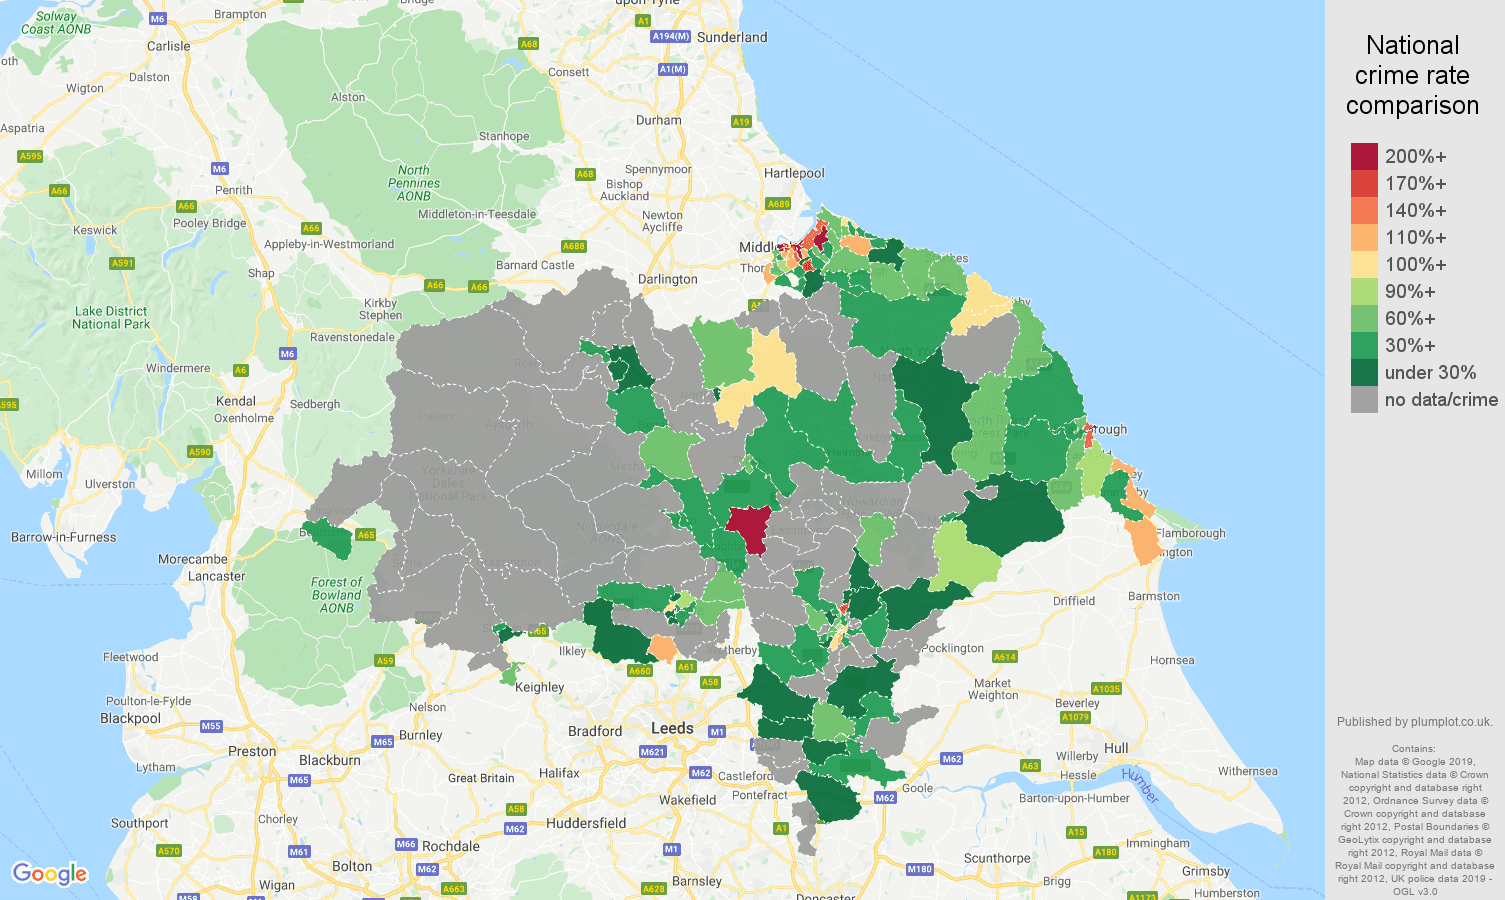 North Yorkshire possession of weapons crime rate comparison map